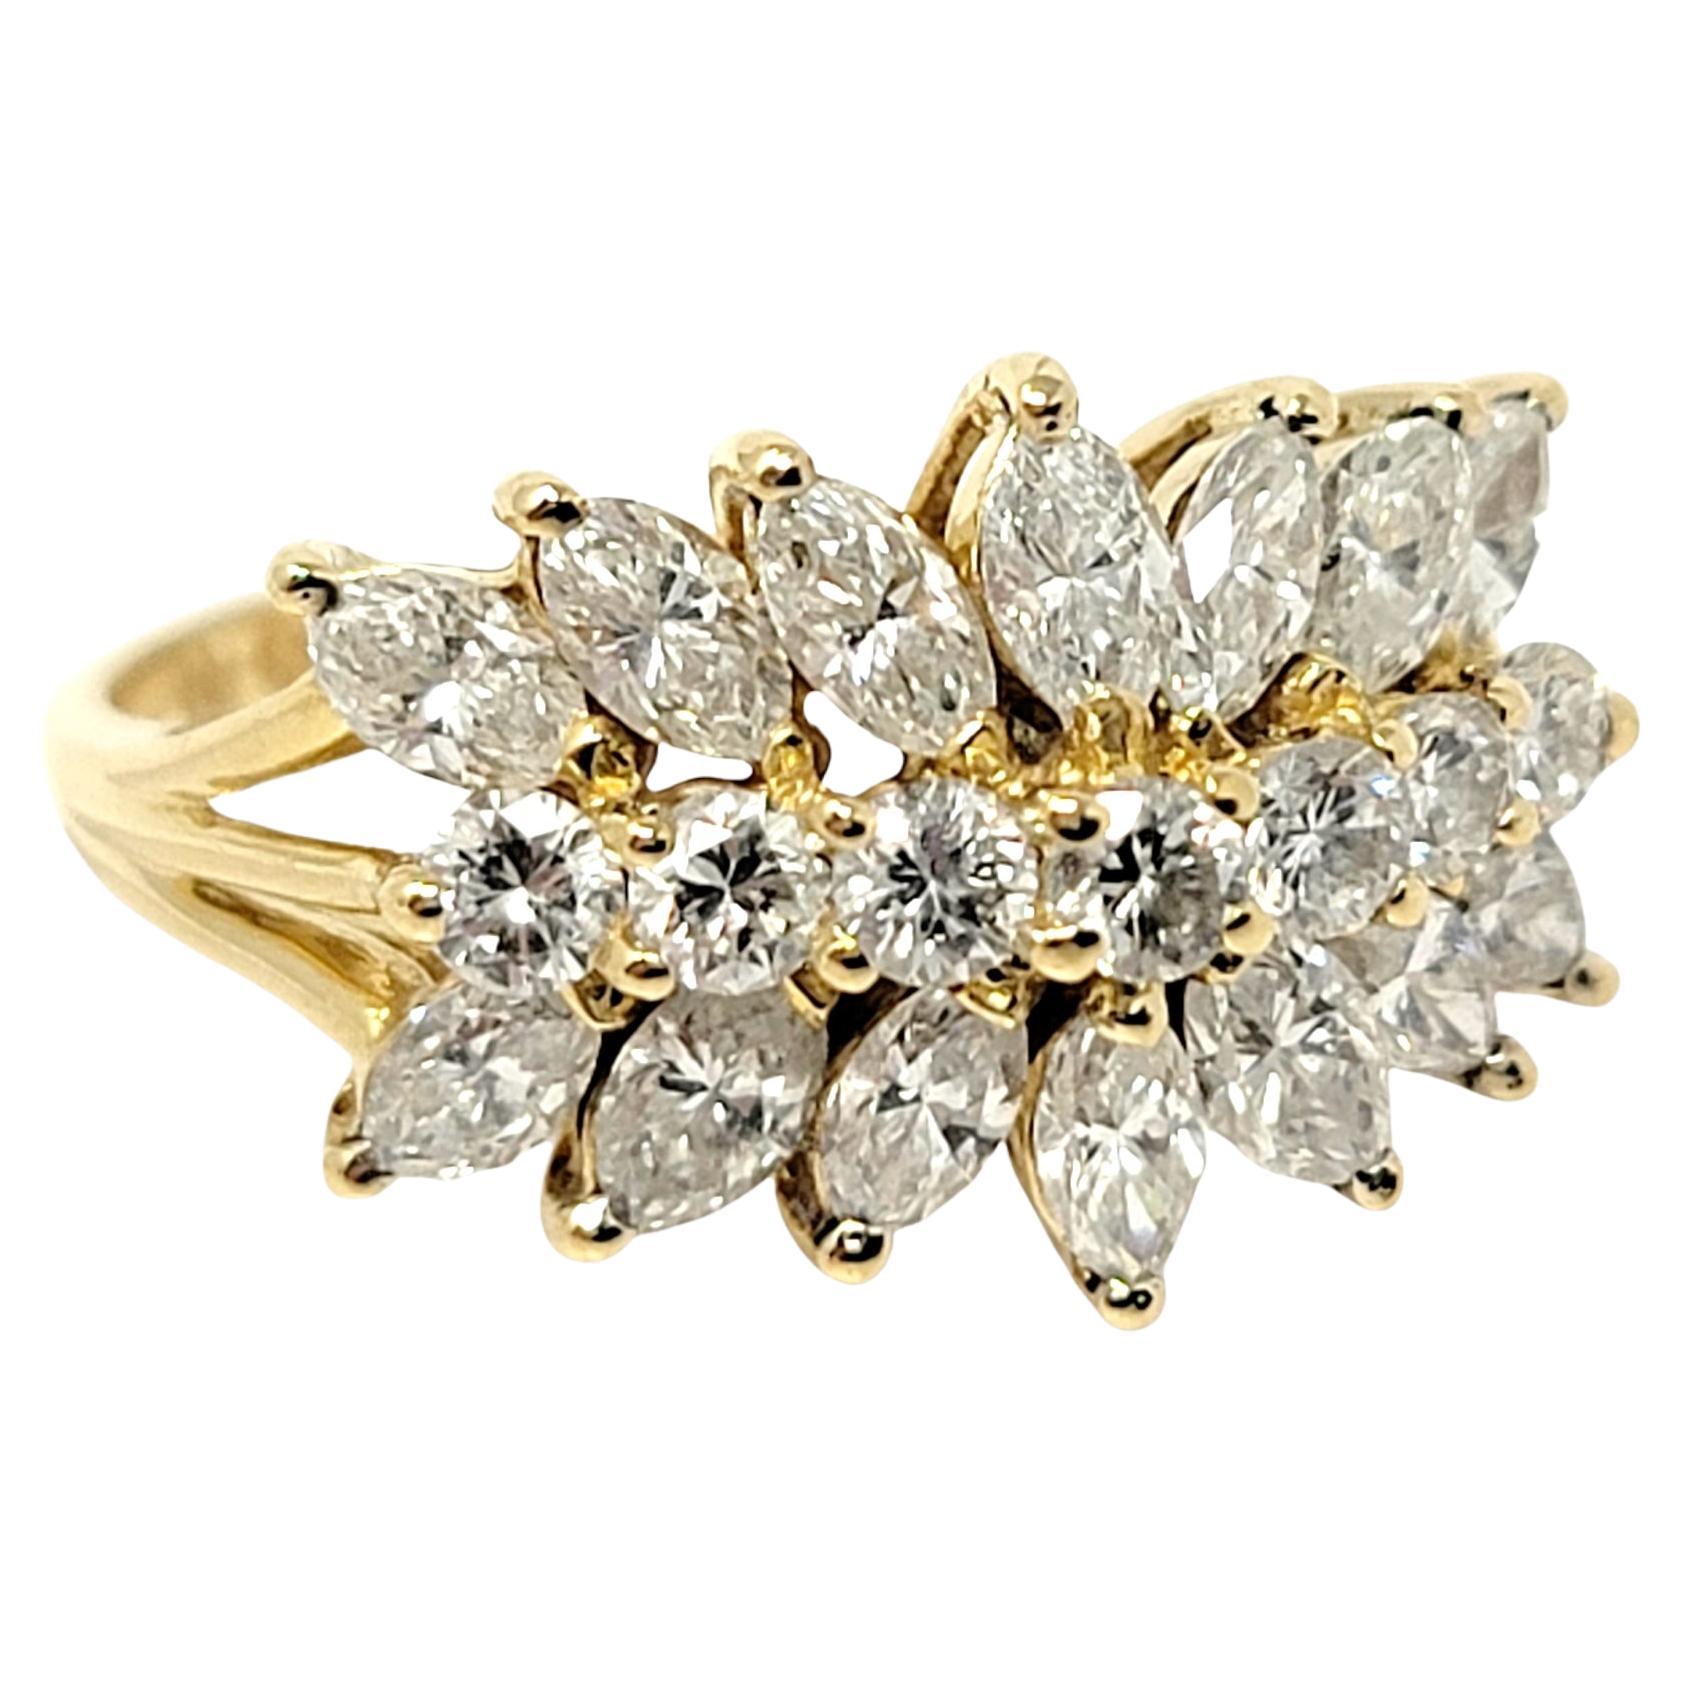 Ring size: 6.5

Glittering multi-row diamond band ring filled with icy white marquis and round shaped diamonds. The elegant tightly clustered design makes the natural stones shimmer beautifully in the light and fill the finger with massive sparkle. 